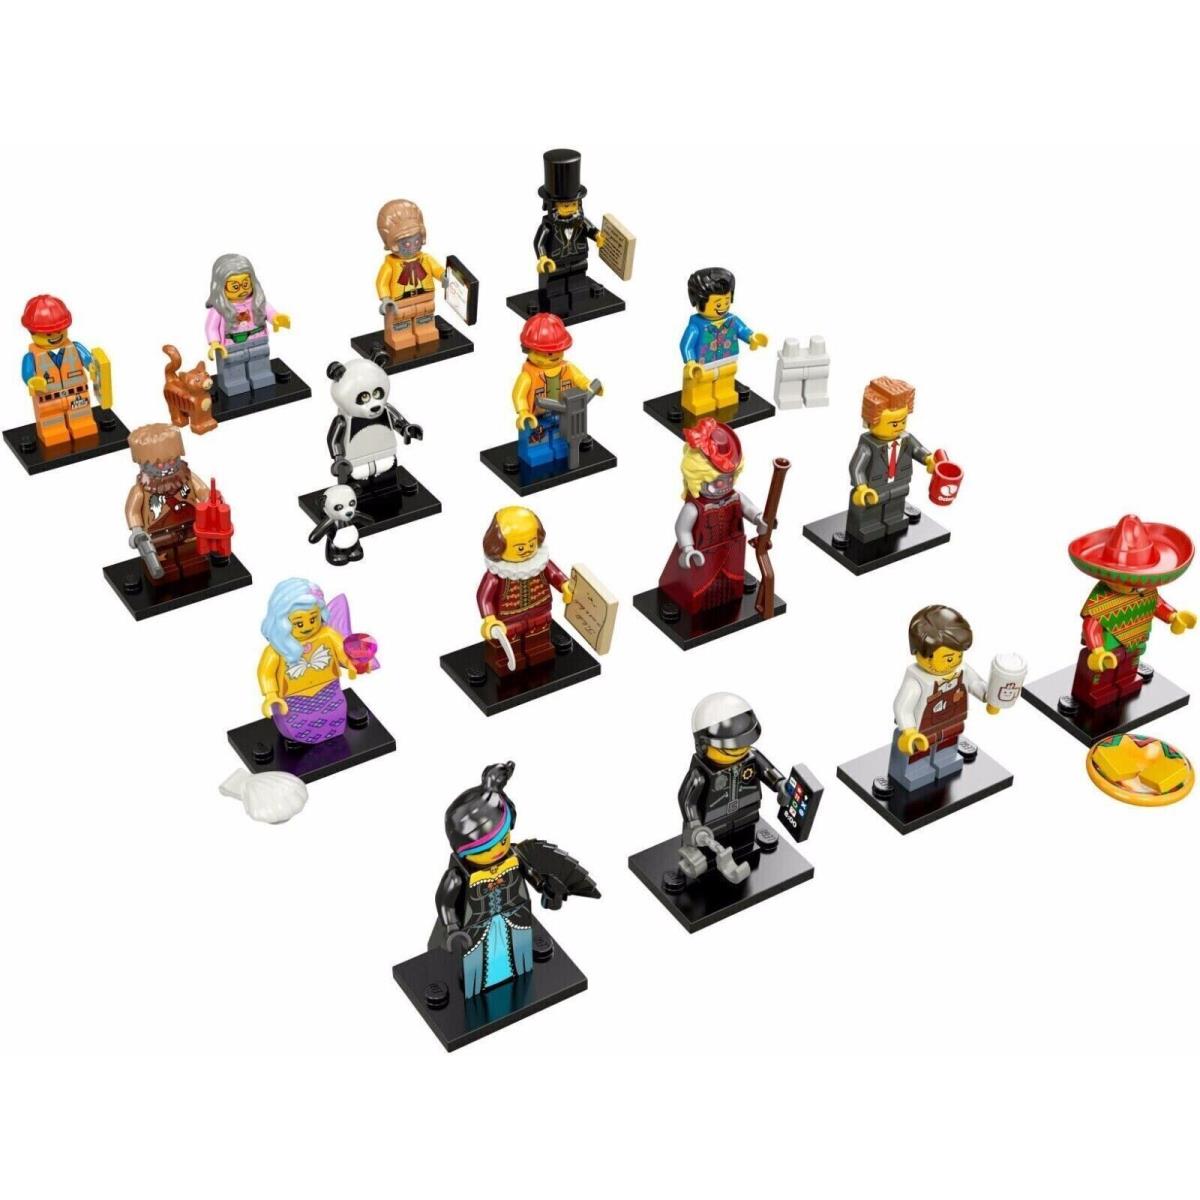 The Lego Movie Series 1 Minifigures 71004 Complete Set of 16